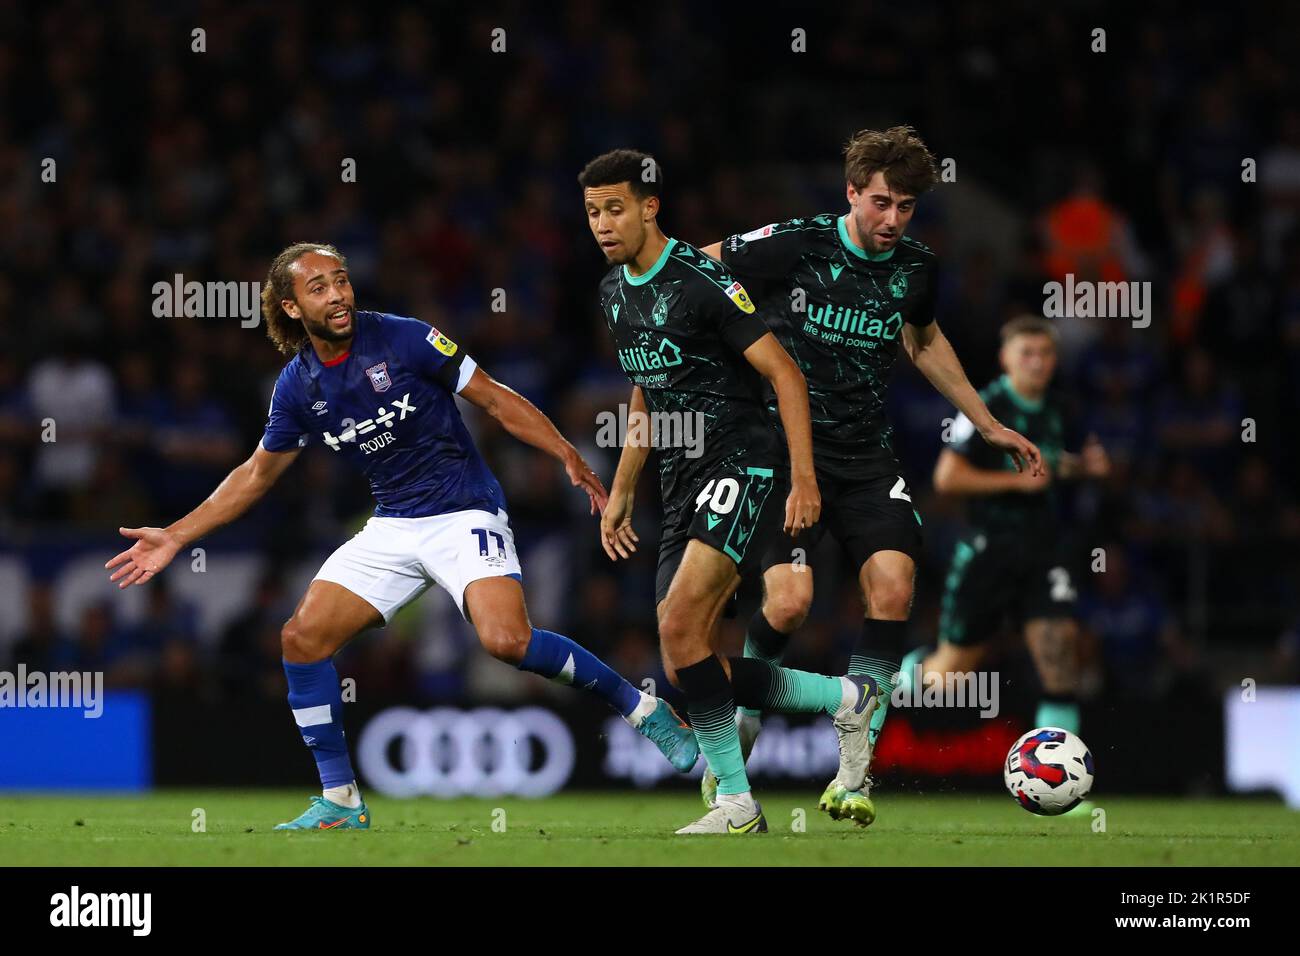 Marcus Harness of Ipswich Town in action with Luca Hoole (L) and Antony Evans (R) of Bristol Rovers - Ipswich Town v Bristol Rovers, Sky Bet League One, Portman Road, Ipswich, UK - 13th September 2022  Editorial Use Only - DataCo restrictions apply Stock Photo